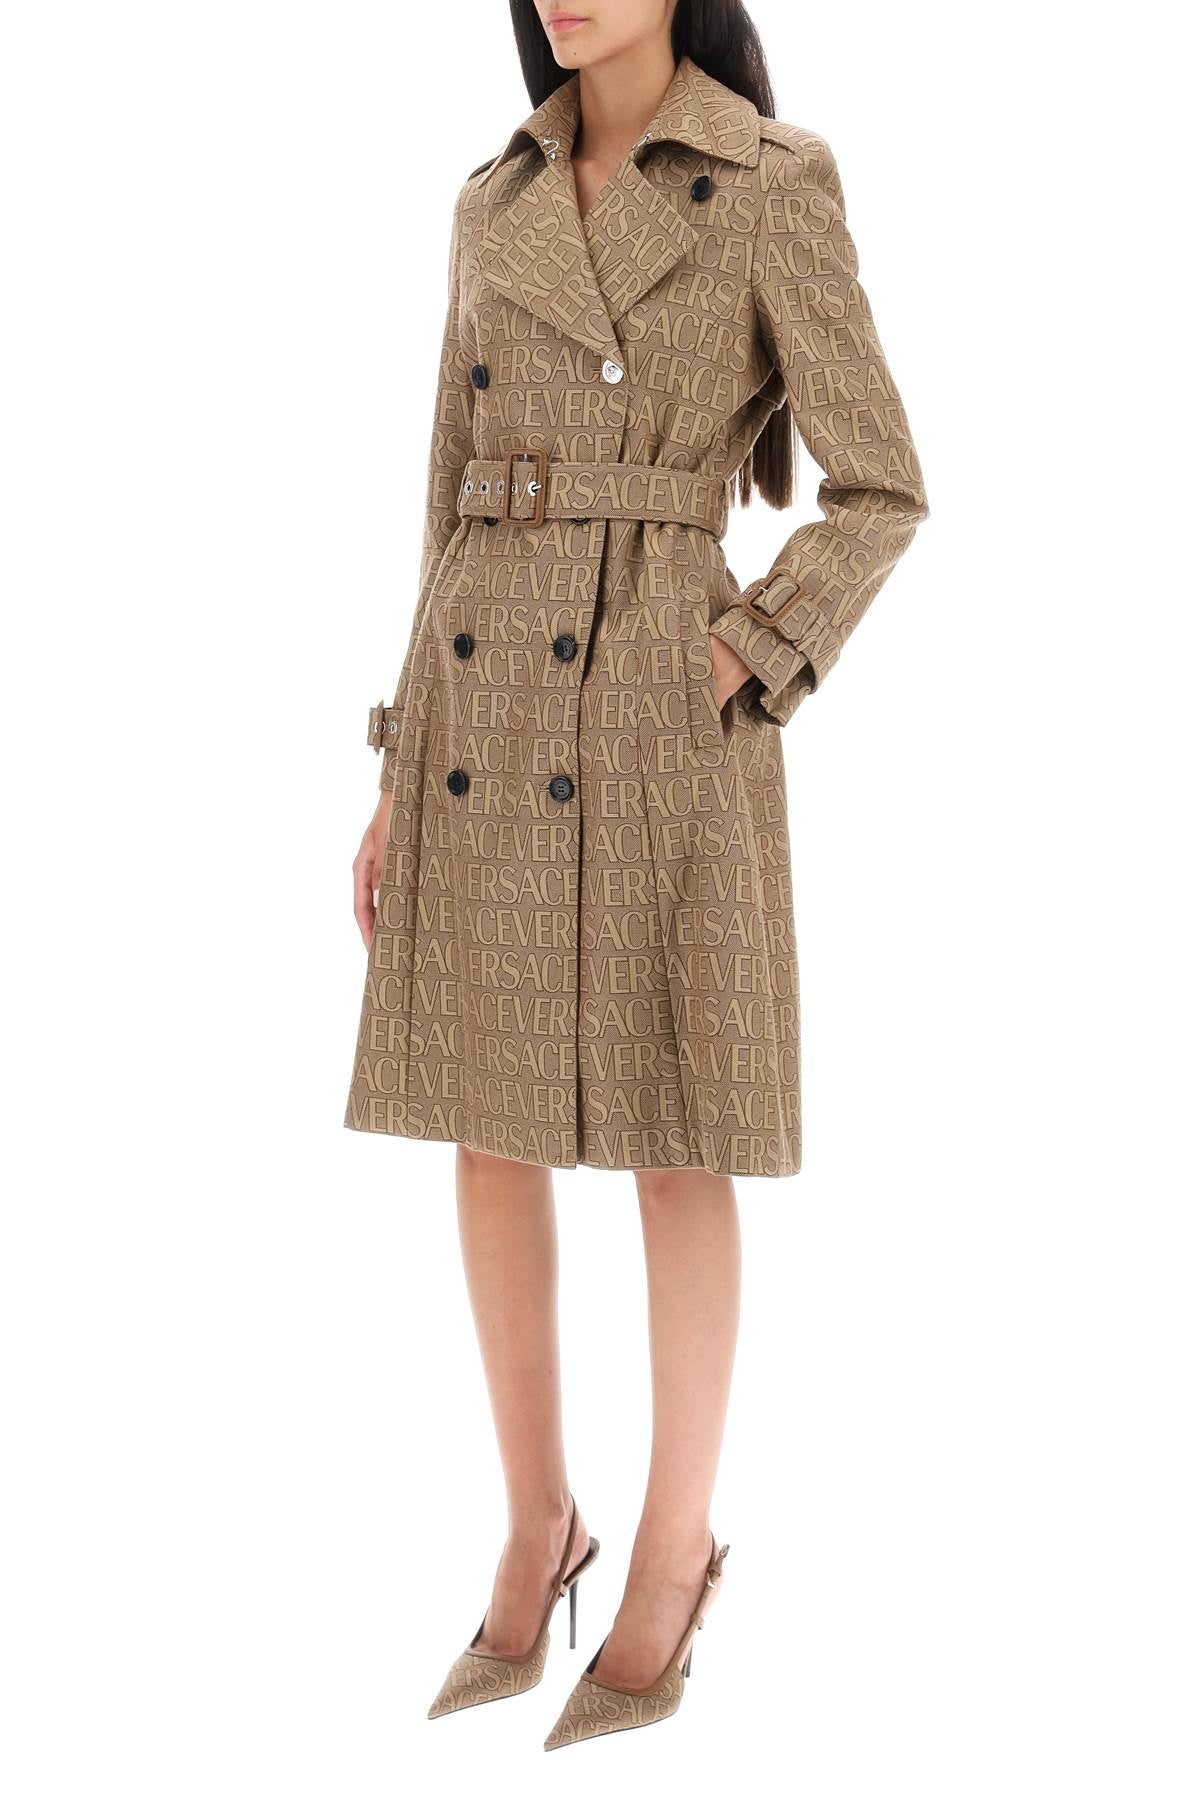 Versace 'versace allover' double-breasted trench coat-3